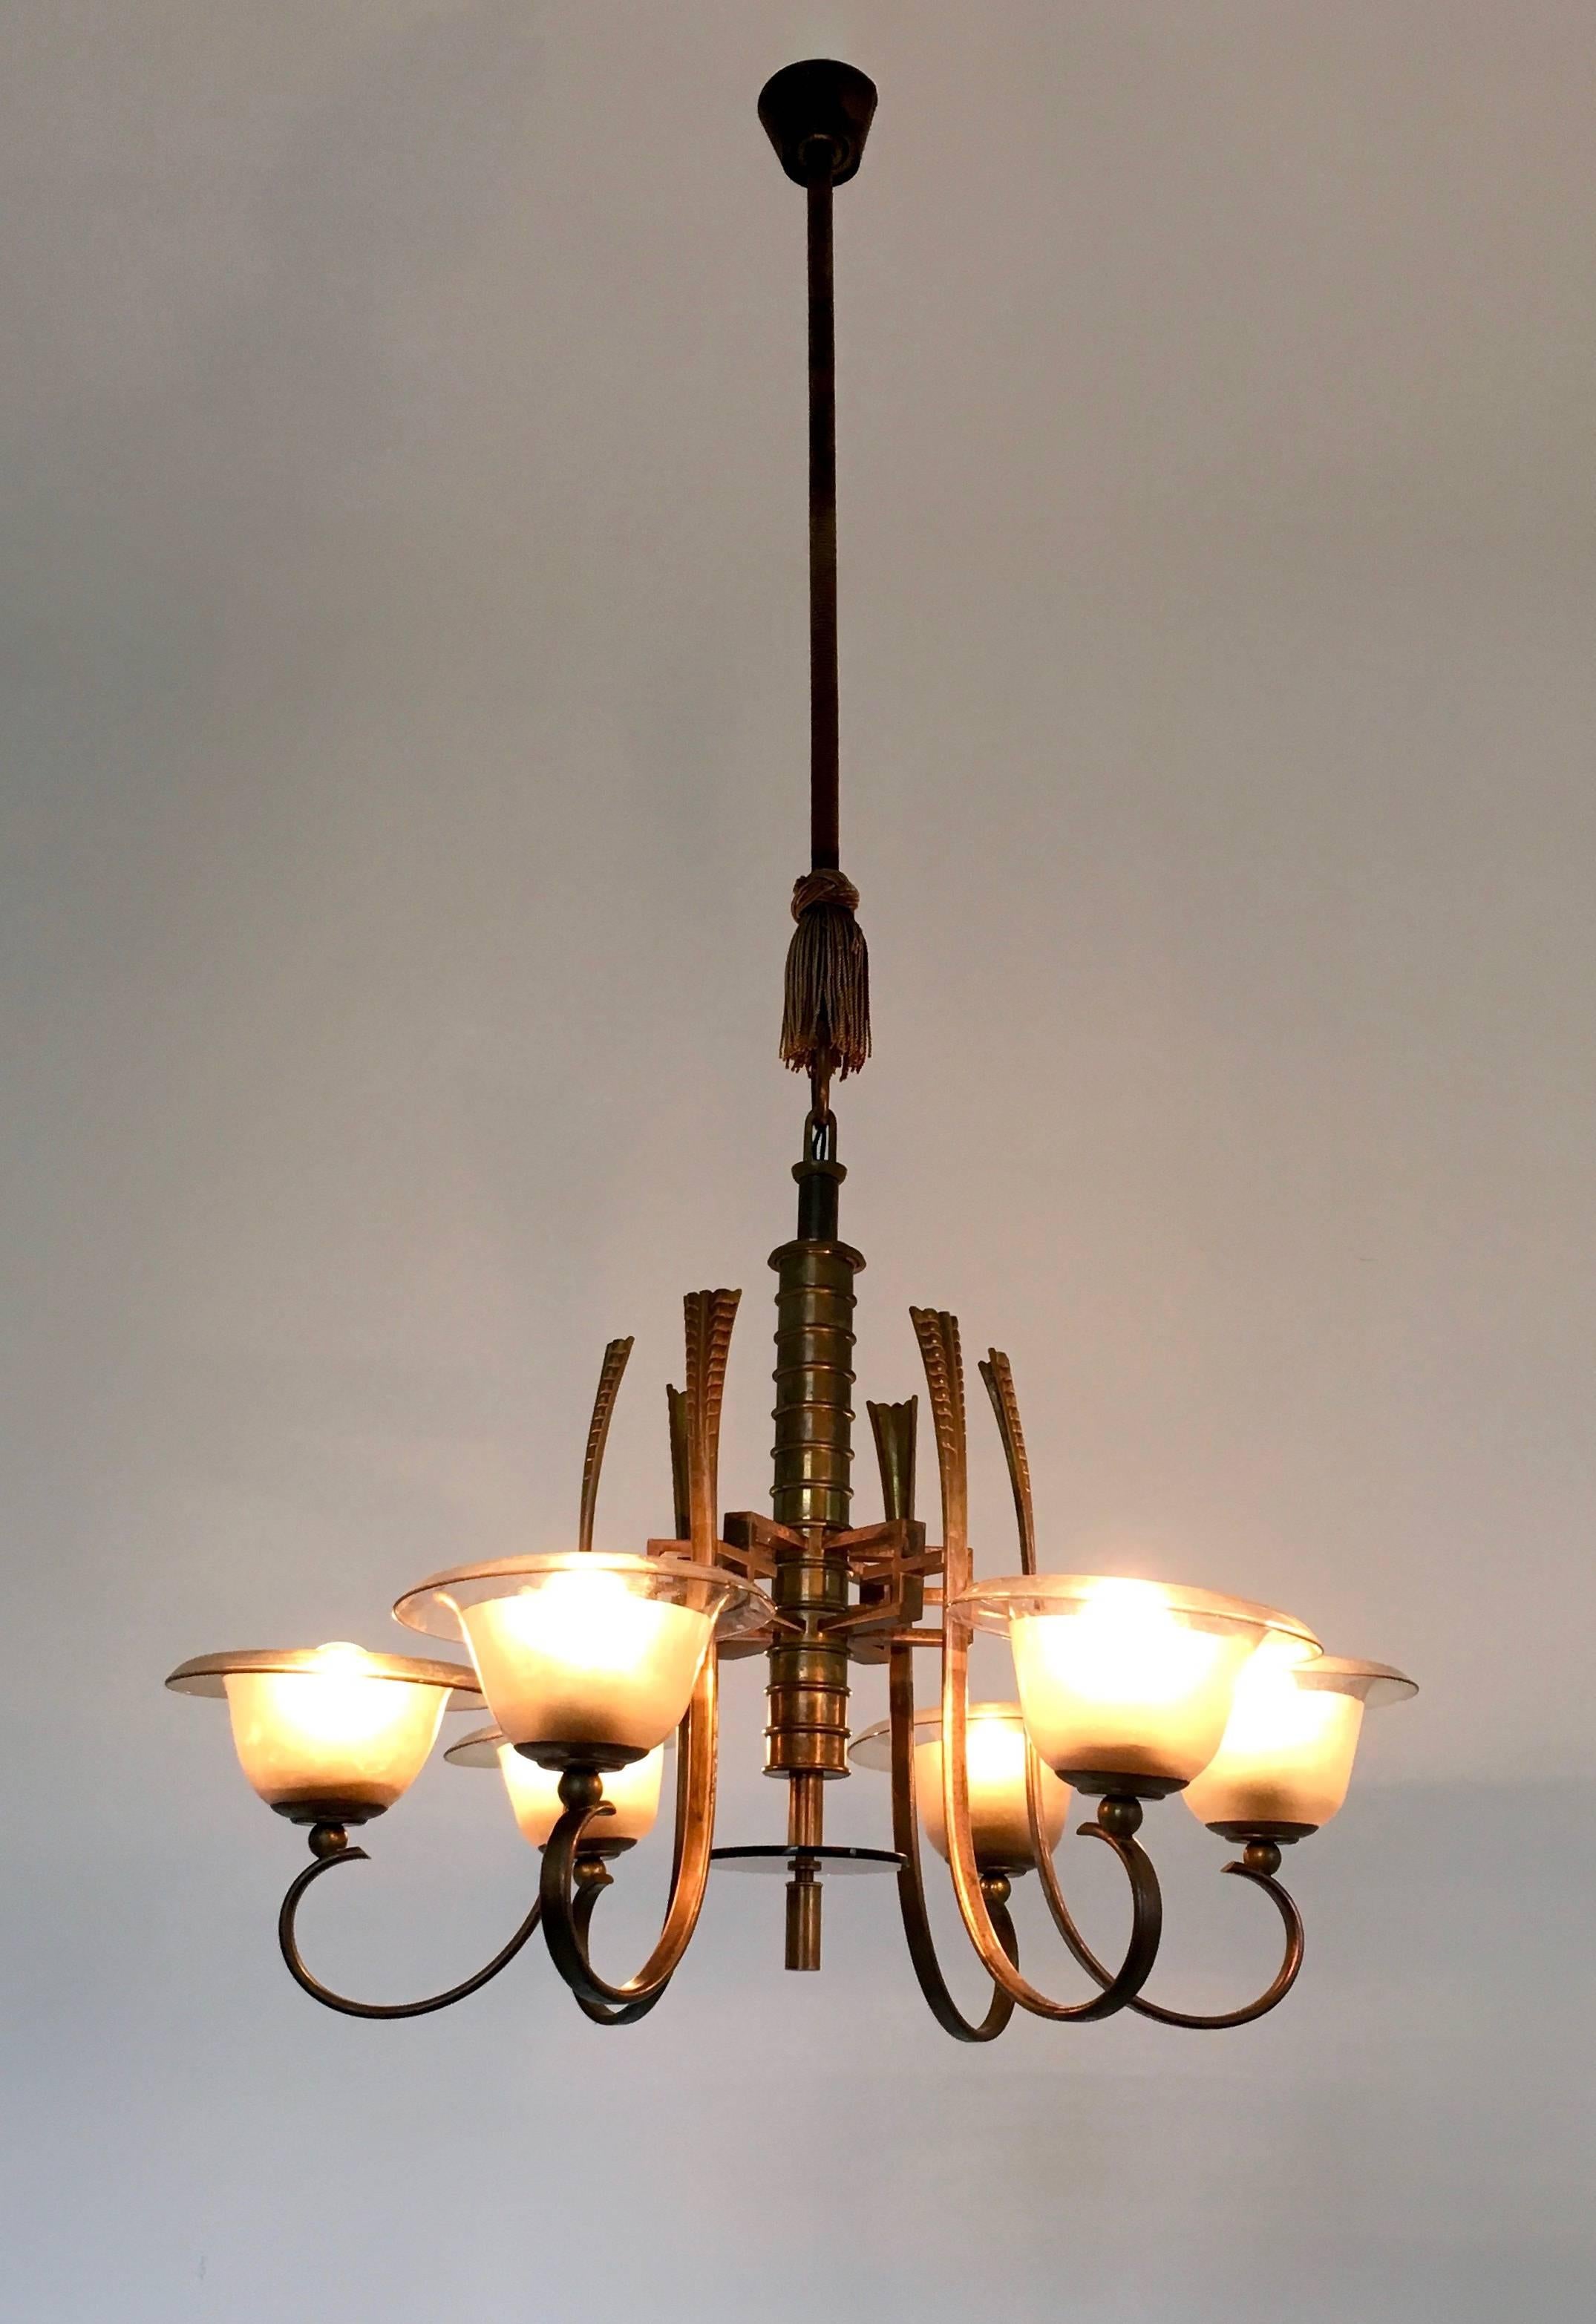 Made in Italy, 1930s.
It is made in blown and glass and features a brass frame.
This chandelier is a vintage piece, therefore it might show slight traces of use, but it can be considered as in very good and working original condition. 

Diameter: 75